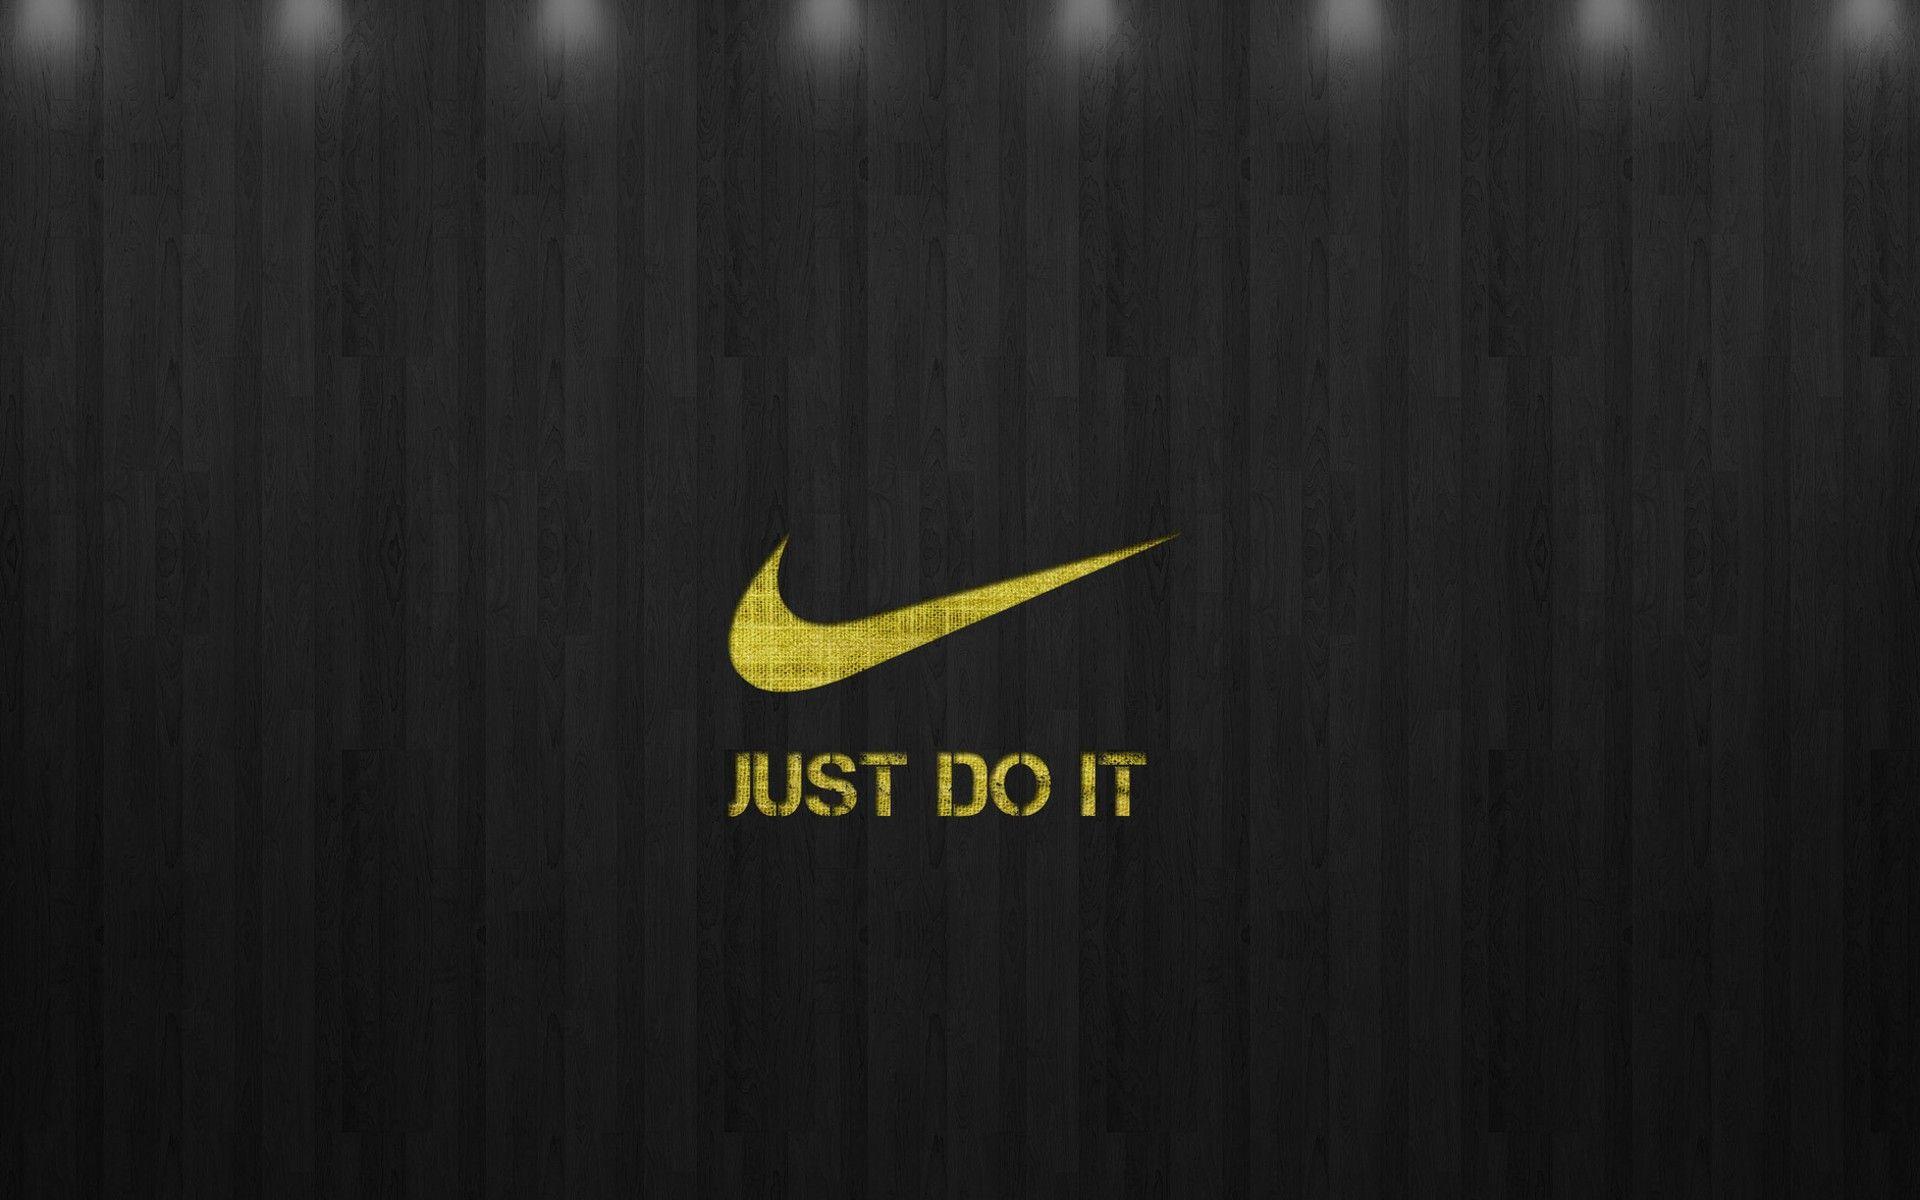 Just Do It wallpaper. Just Do It